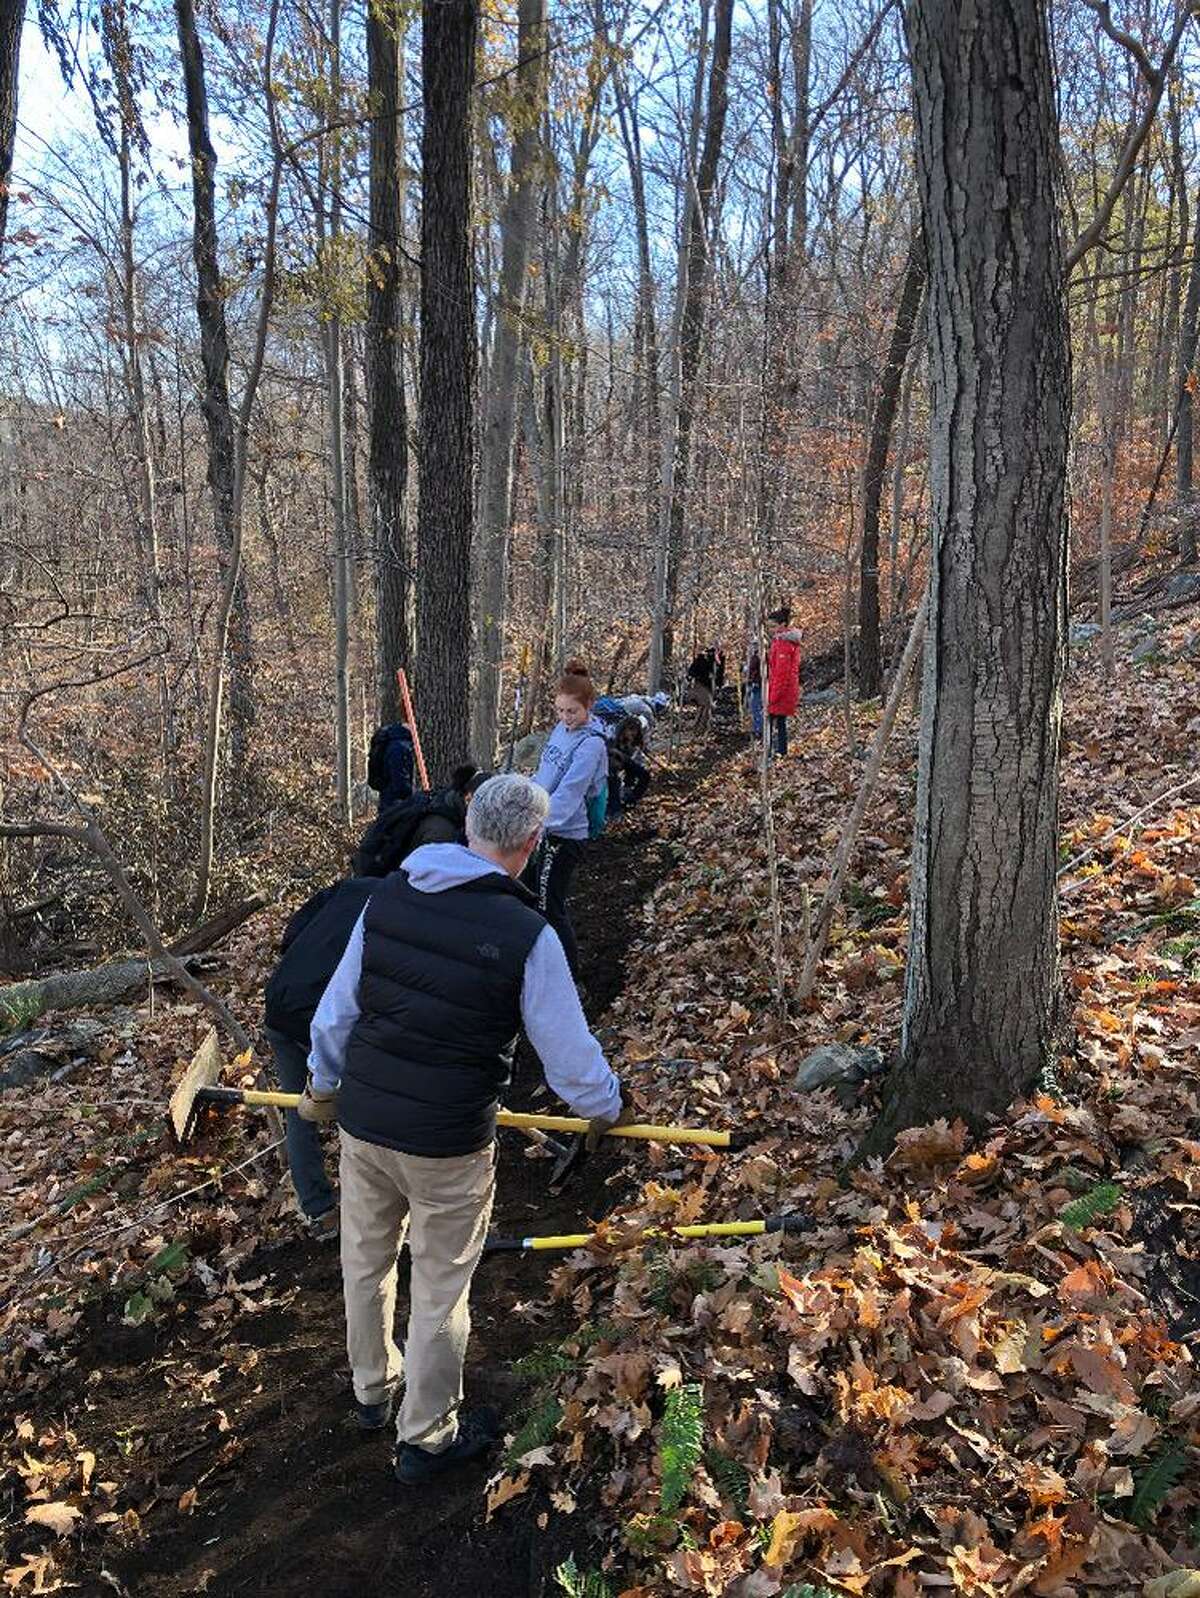 Eagle Scout candidate Tim Porter organized a crew of fellow scouts from Troops 431 and 19 along with some parents to install a new trail through the former Schlumberger property.